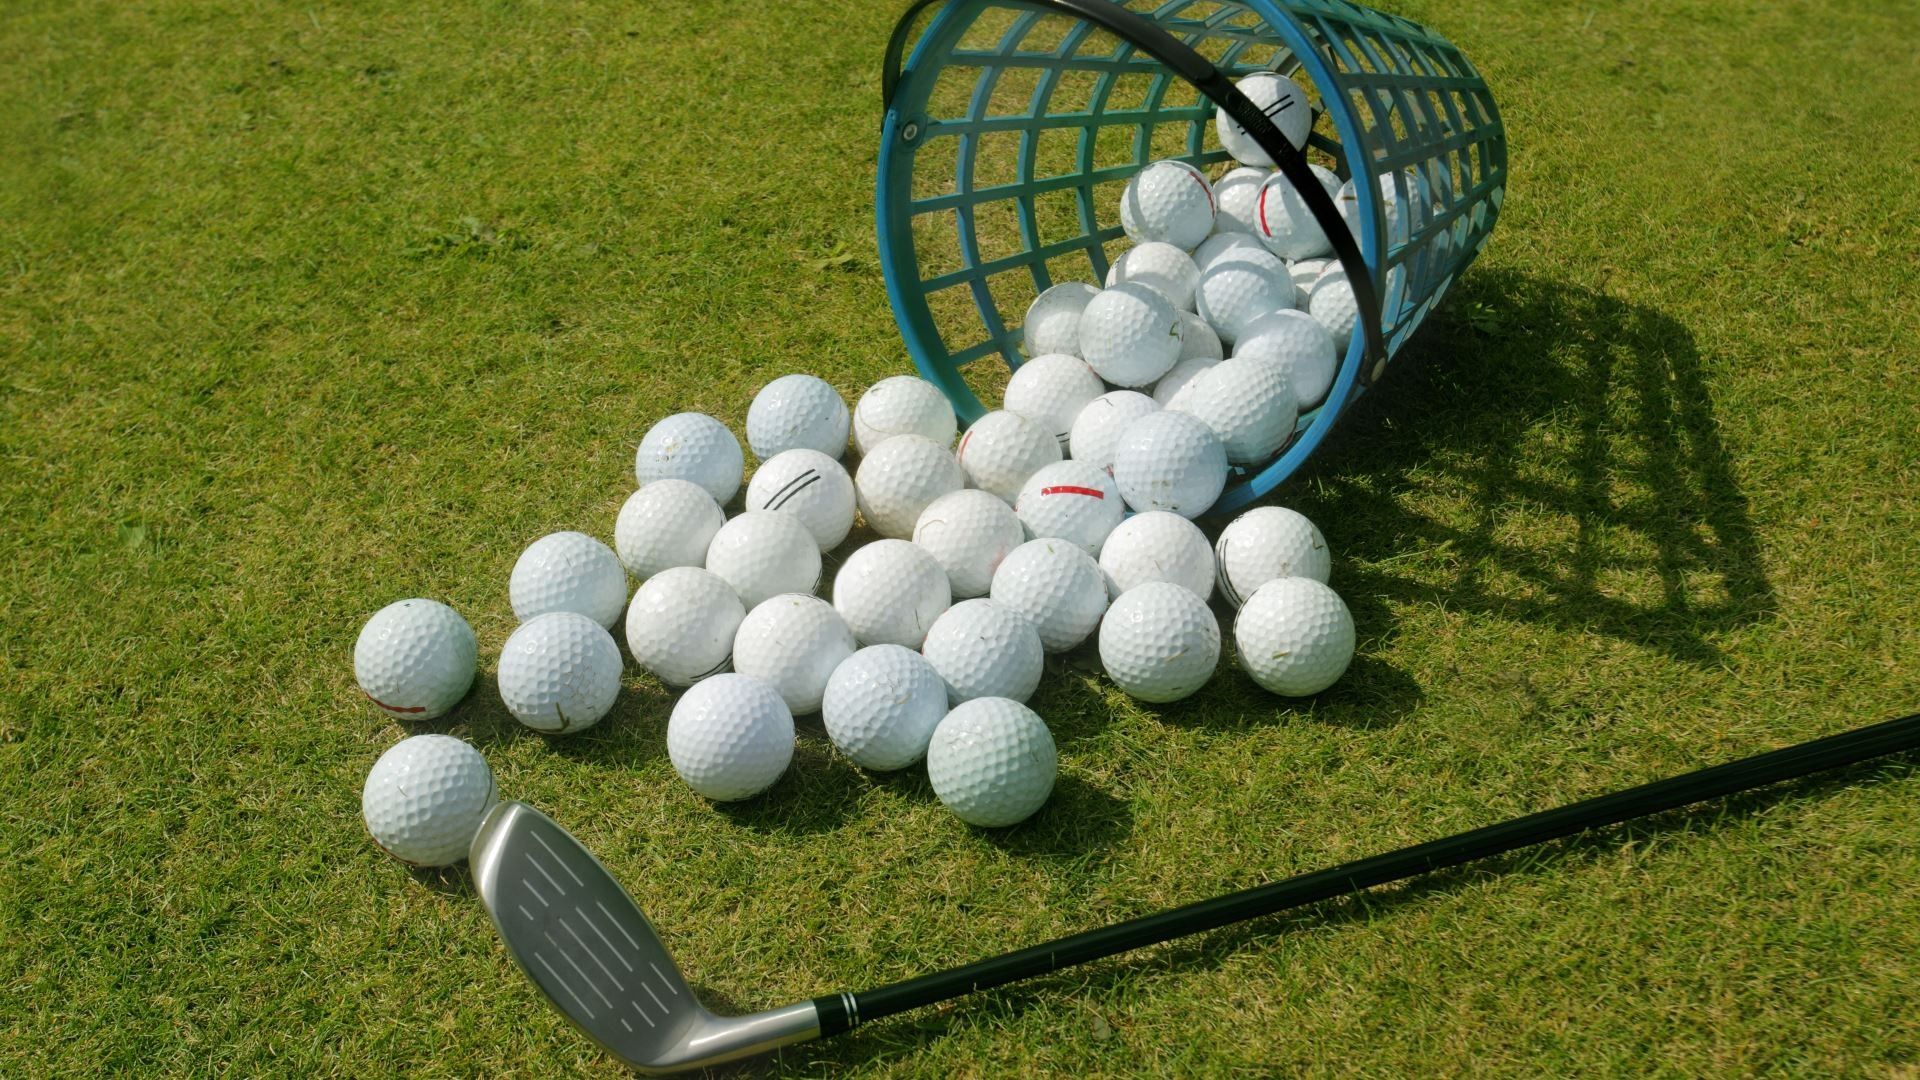 Golf balls on the golf course wallpaper download. Wallpaper, picture, photo